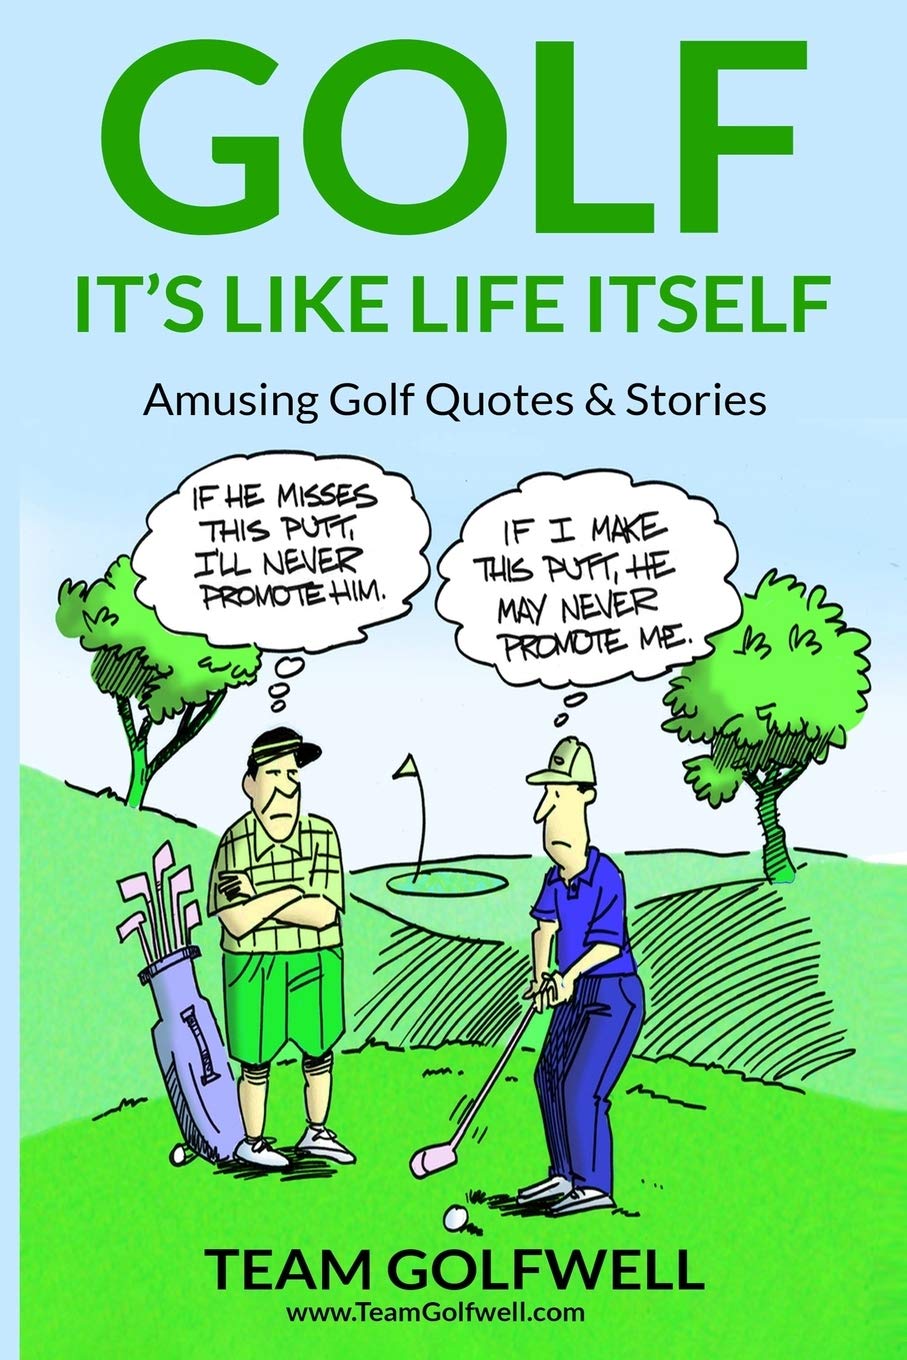 71sXqxay3JL - GOLF: It's Like Life Itself. Amusing Golf Quotes & Stories